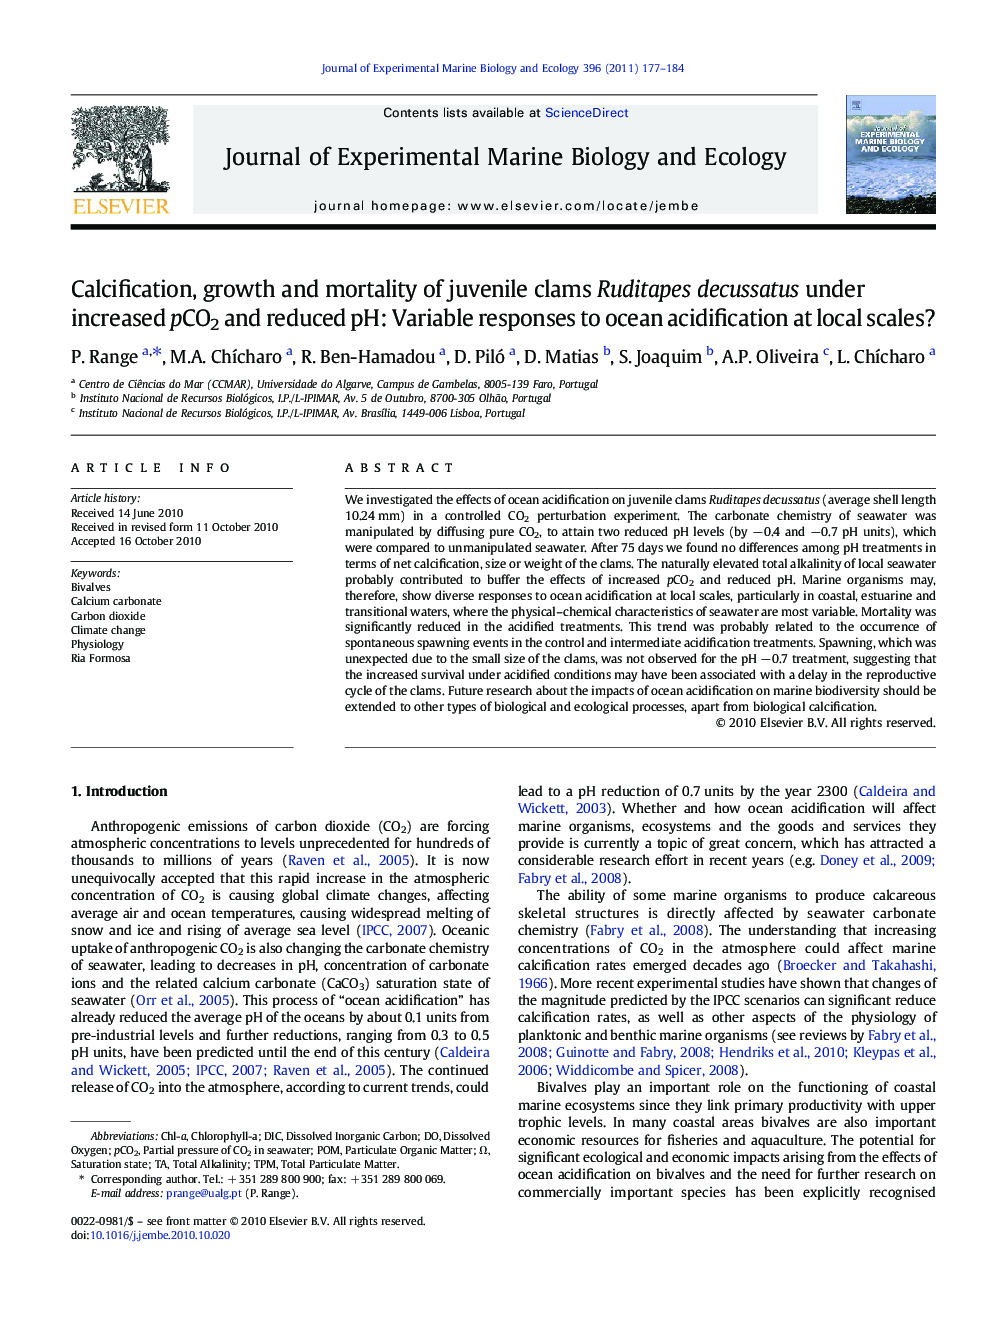 Calcification, growth and mortality of juvenile clams Ruditapes decussatus under increased pCO2 and reduced pH: Variable responses to ocean acidification at local scales?